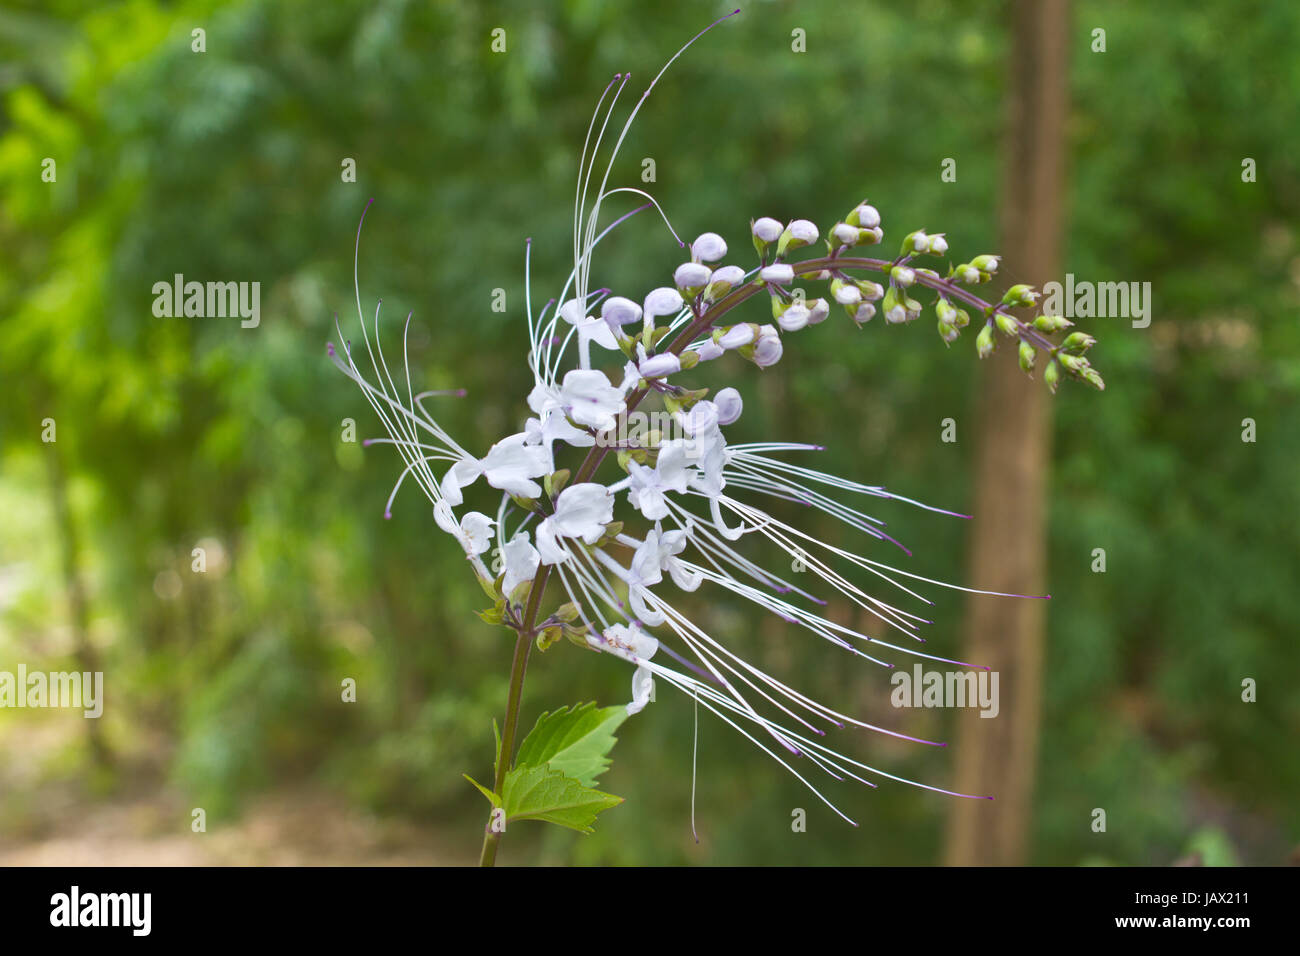 flower from Thailand, Cat's whiskers flowers, Orthosiphon stamineus, in the garden Stock Photo